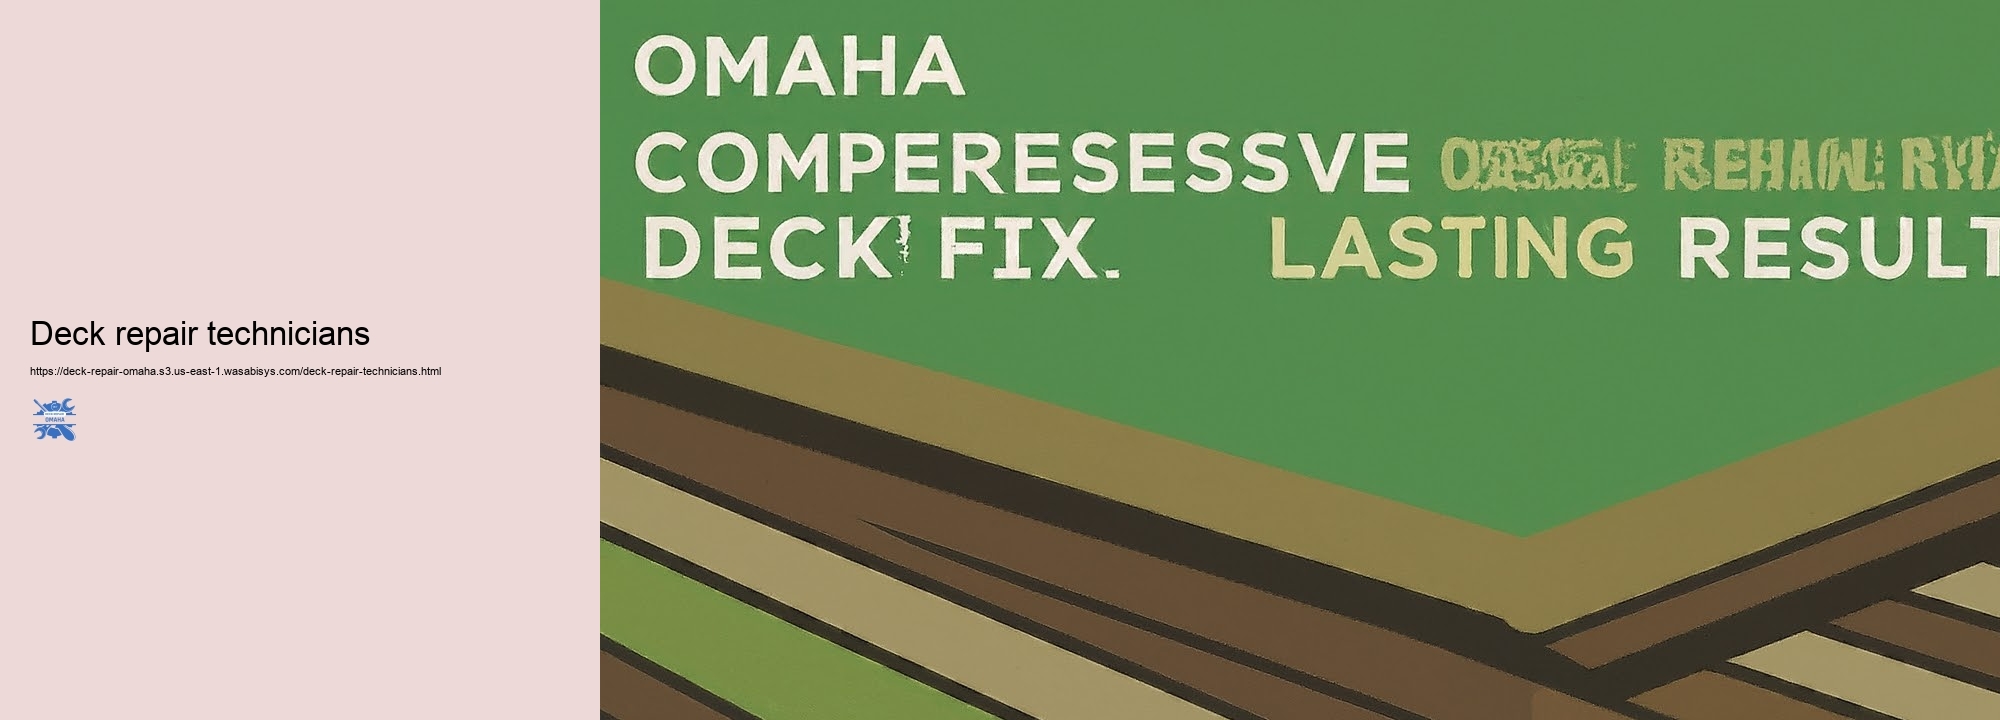 Affordable Deck Repair Work Solutions for Omaha People